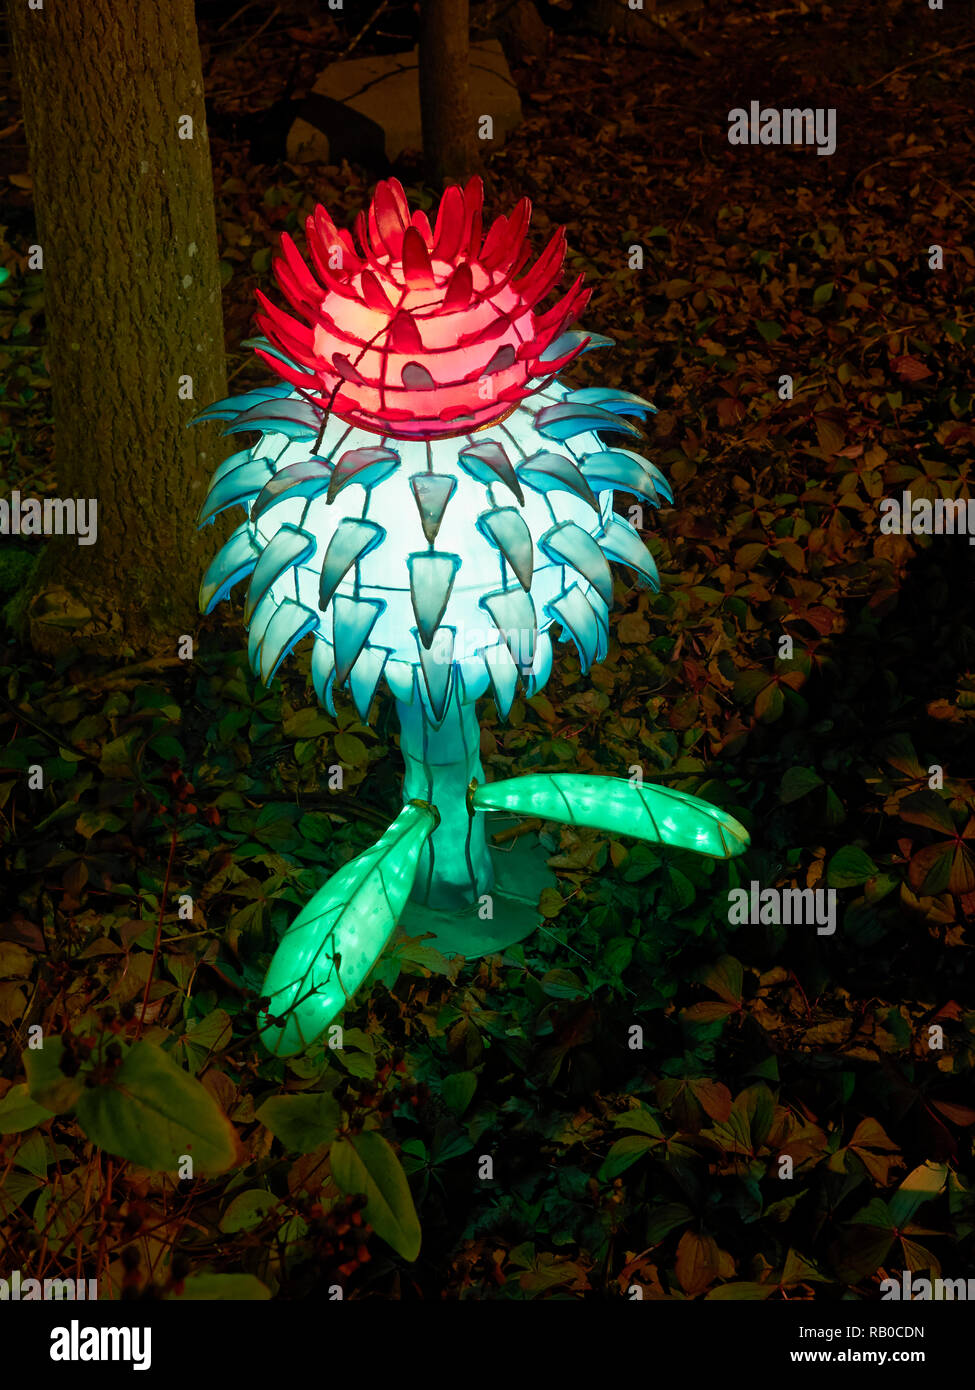 Edinburgh Zoo, Edinburgh, Scotland, UK, 5th January 2019, Giant Lanterns of China Display of Mythical Creatures, Legends and Animals throughout the Zoo during January 2019. Plant. Stock Photo